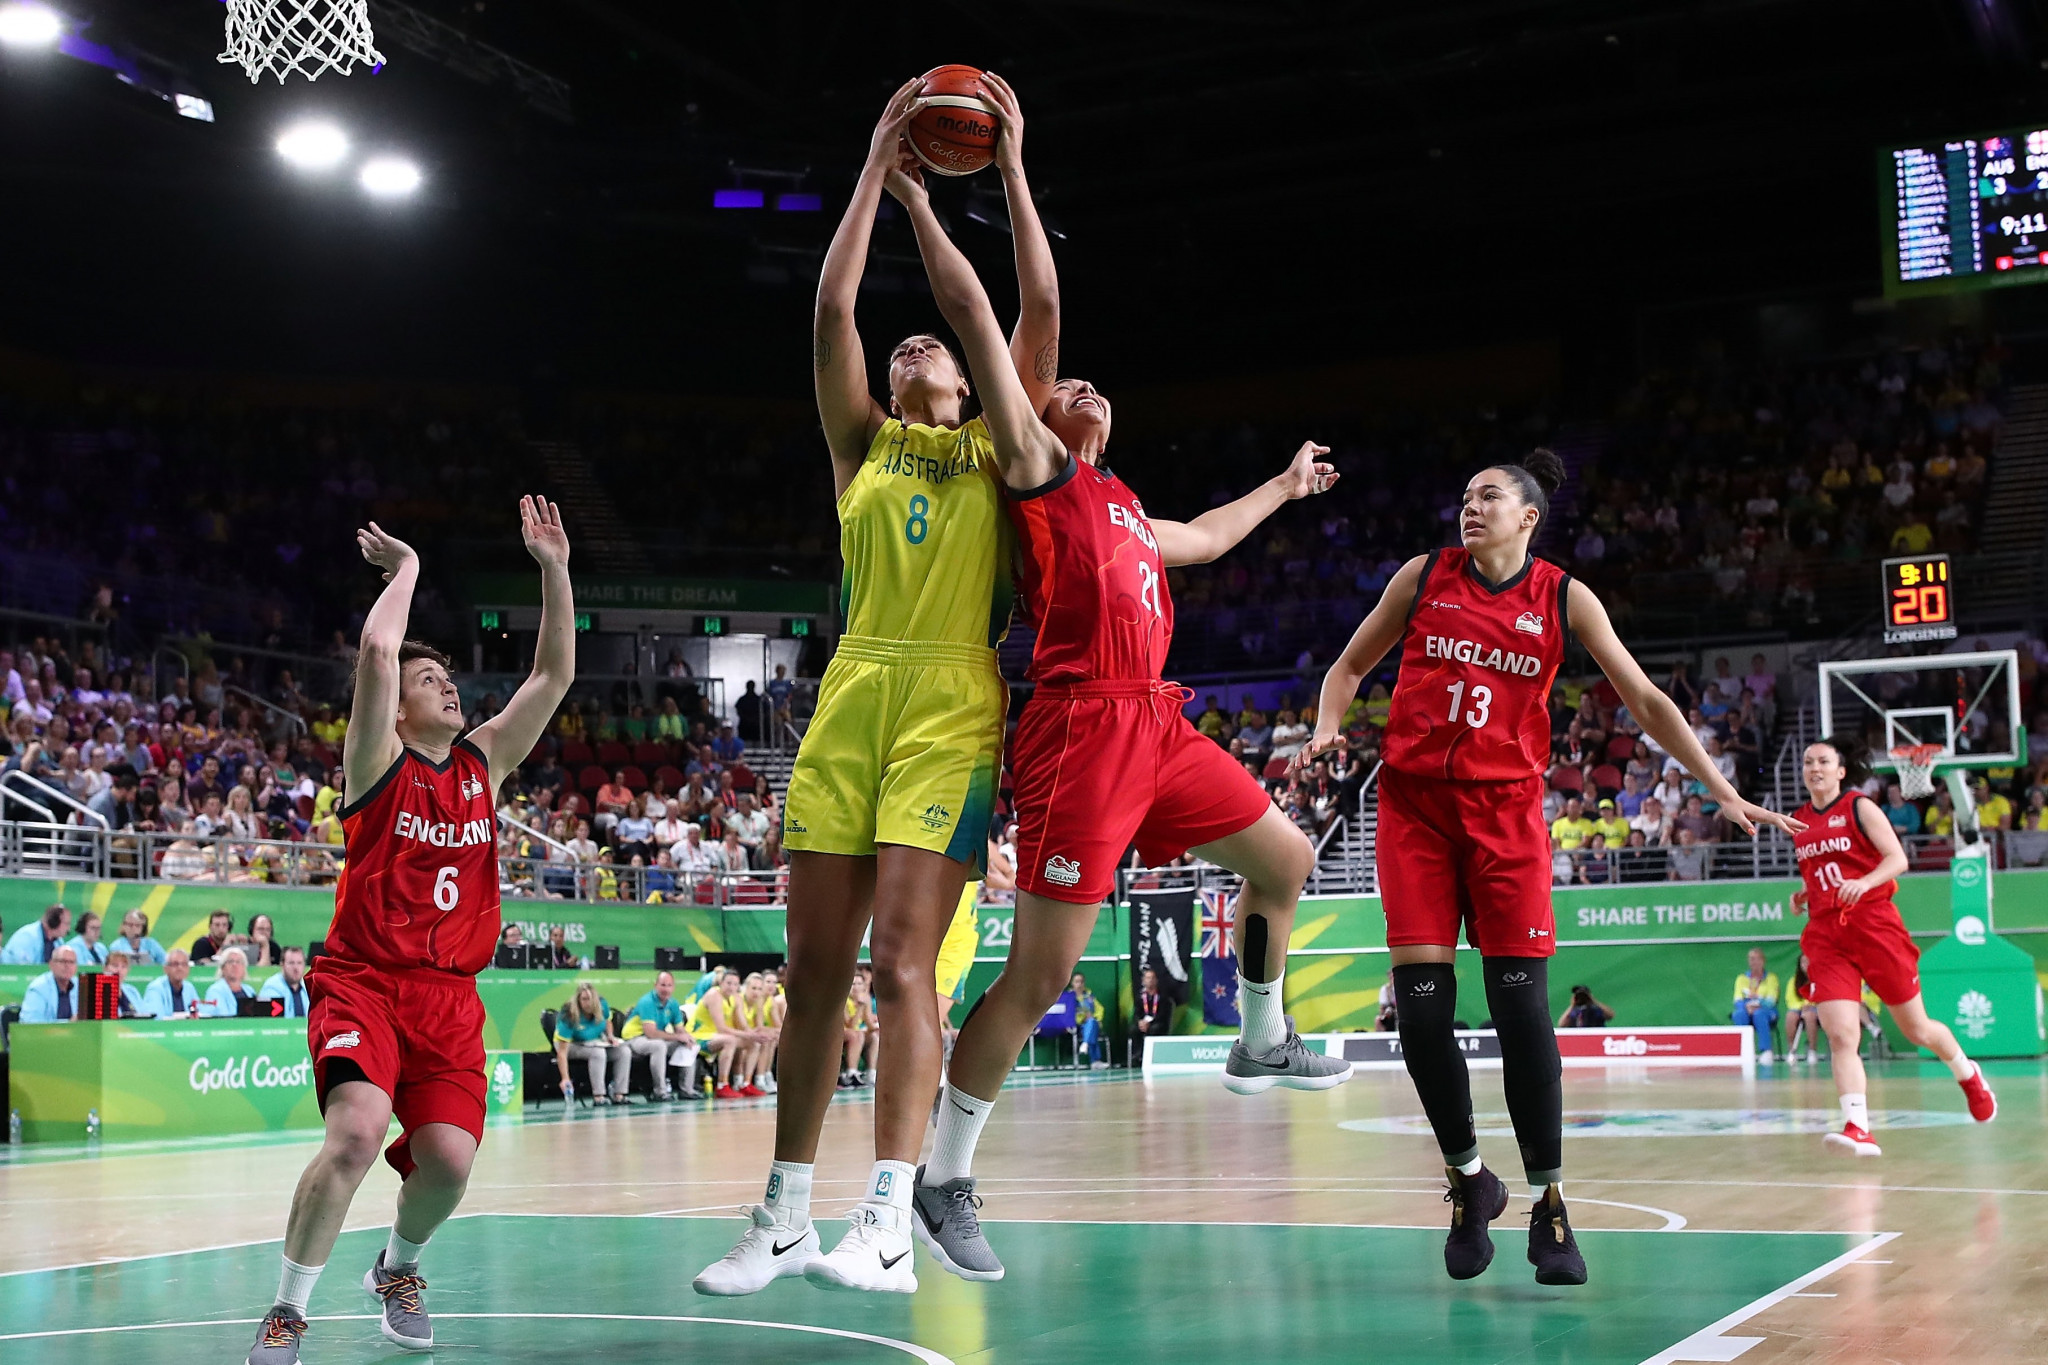 Australia beat England 99-55 in the women's basketball gold medal match ©Getty Images